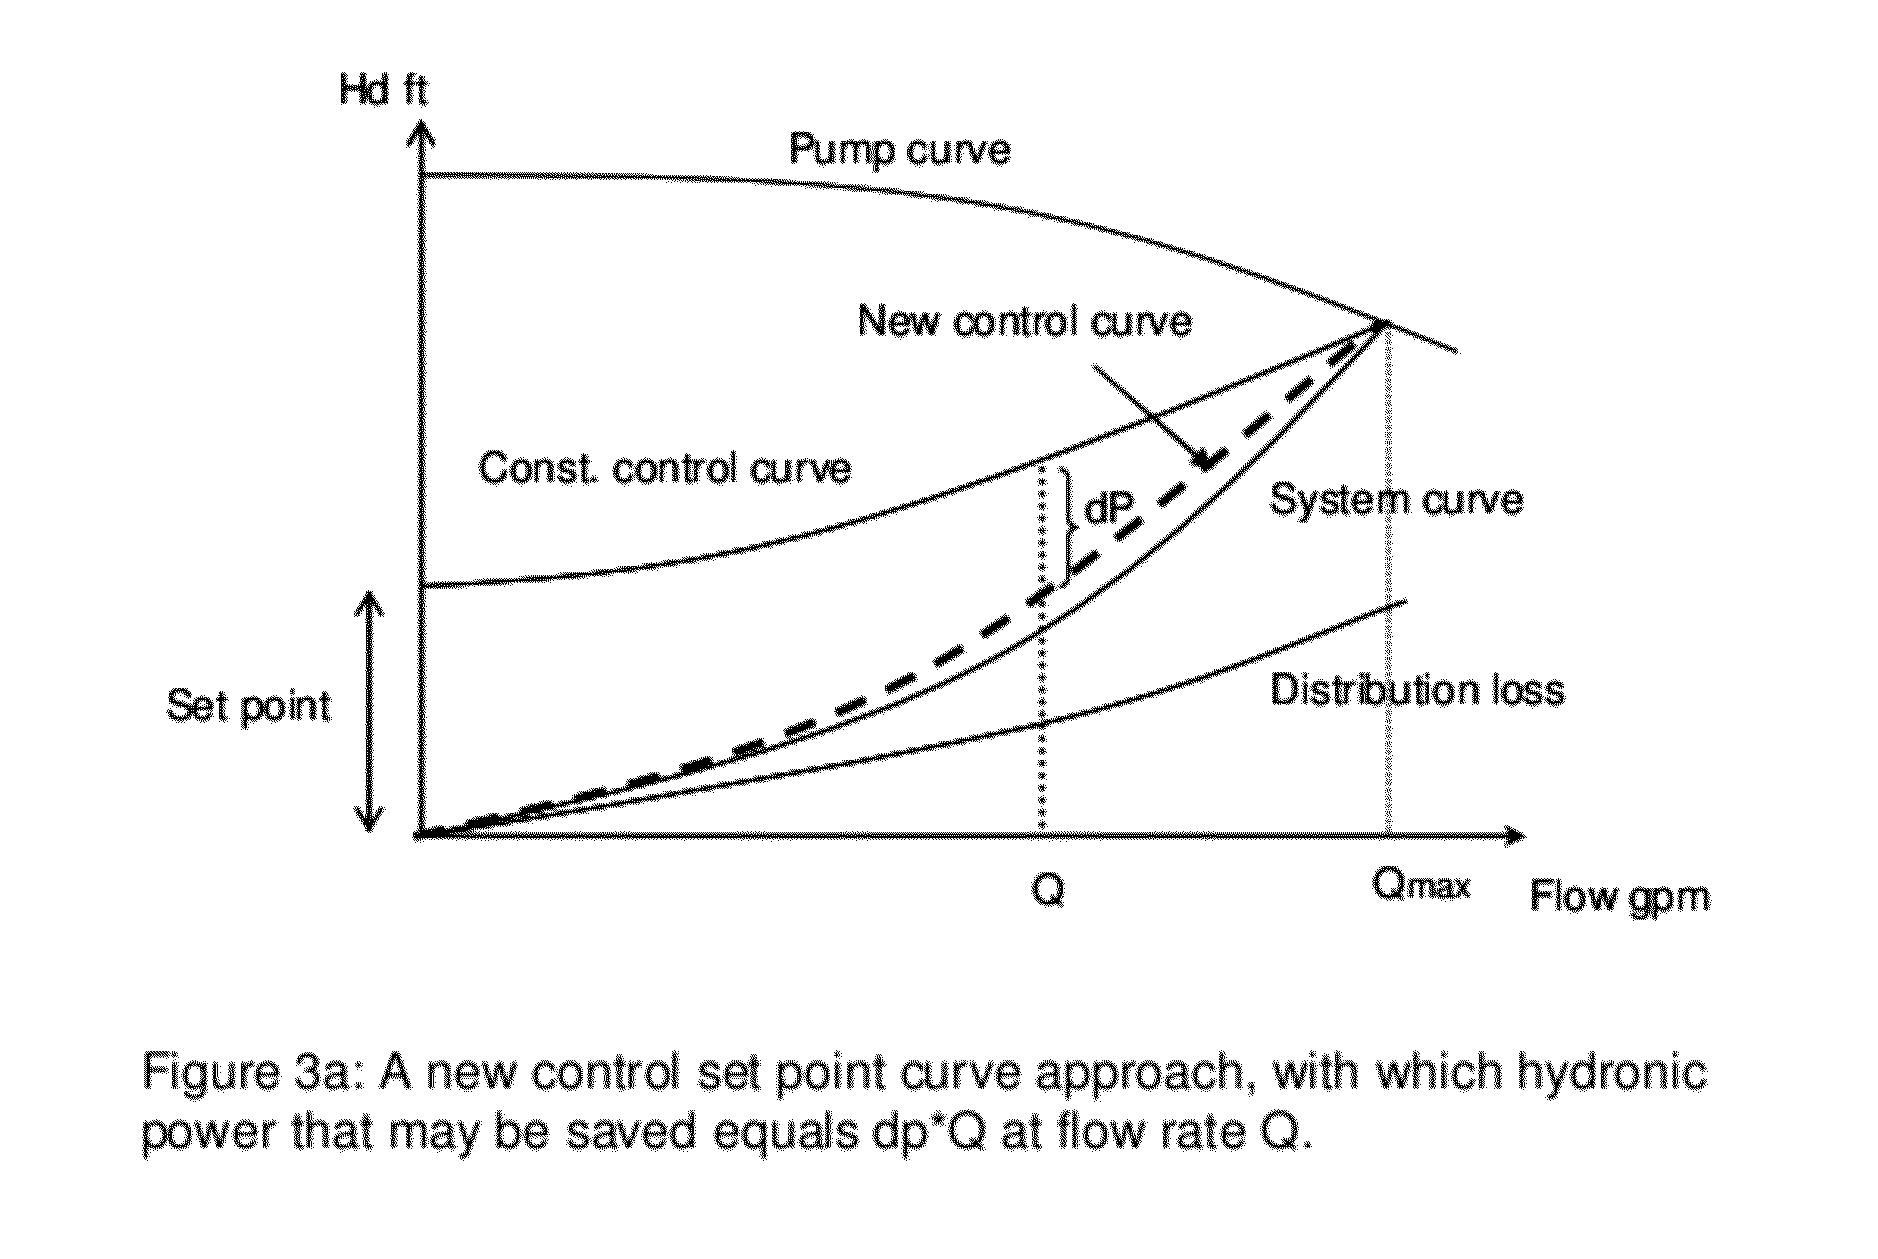 Method and Apparatus for Pump Control Using Varying Equivalent System Characteristic Curve, AKA an Adaptive Control Curve